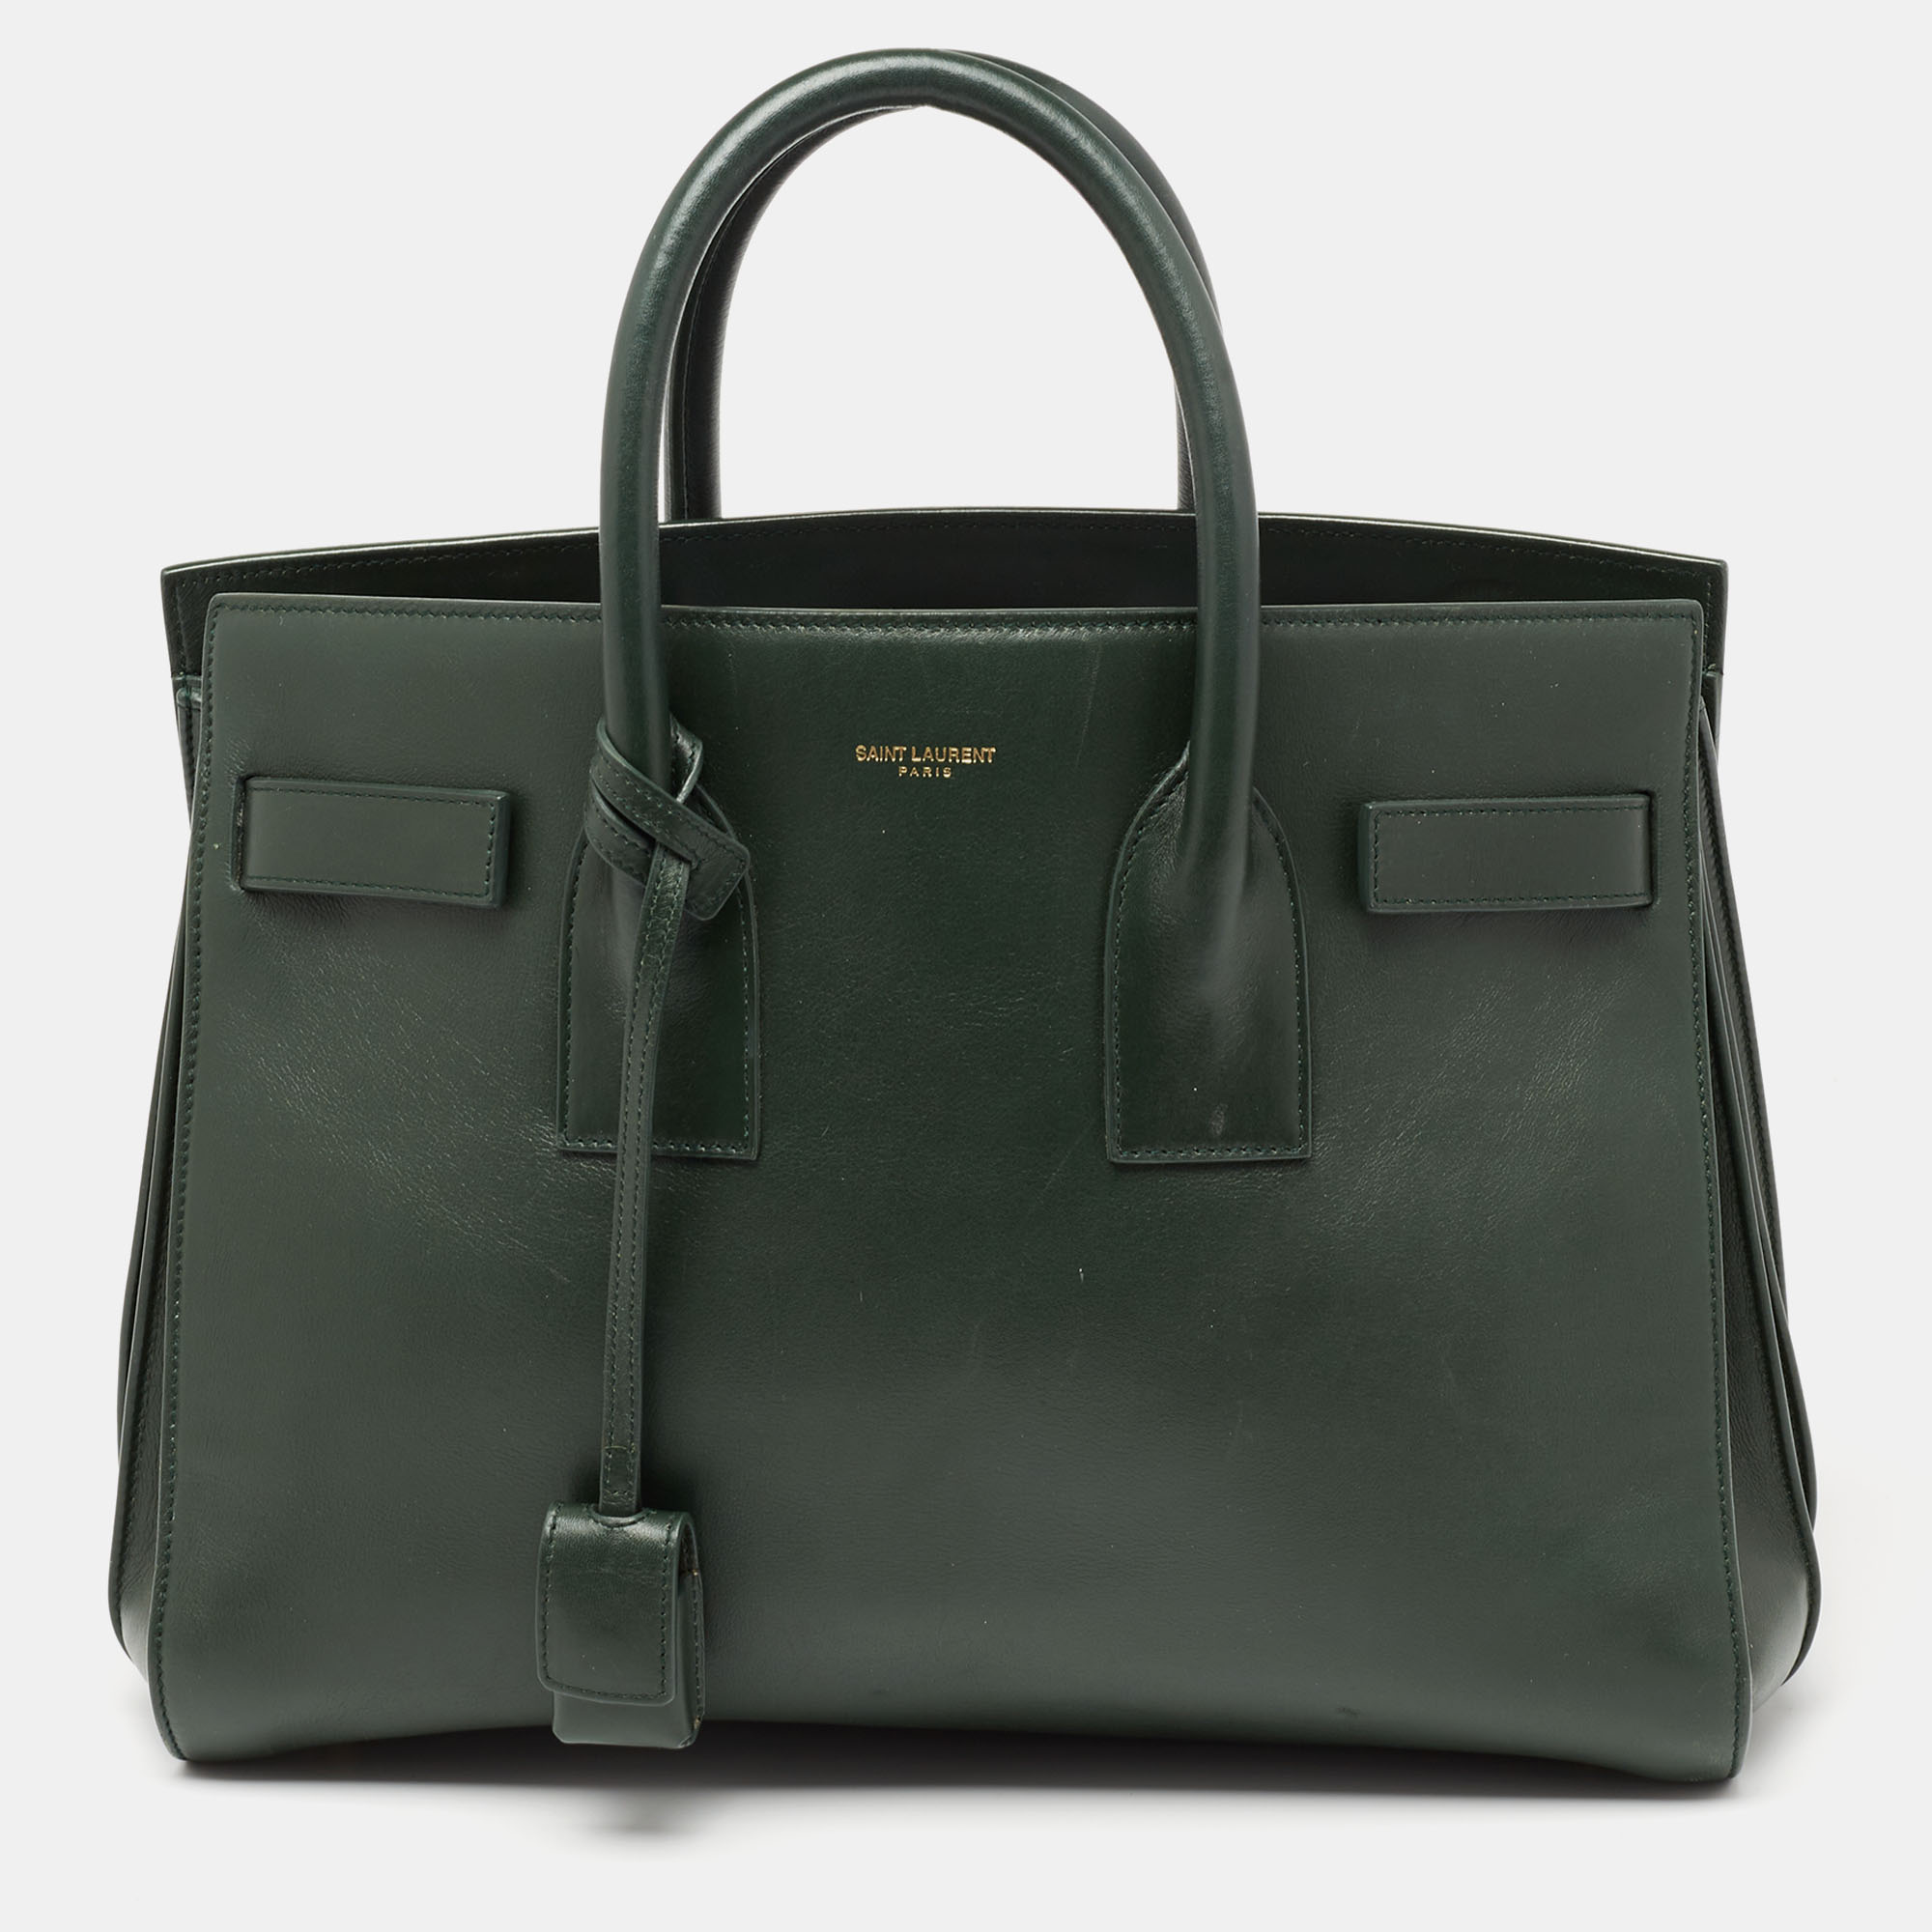 Pre-owned Saint Laurent Emerald Green Leather Small Sac De Jour Tote